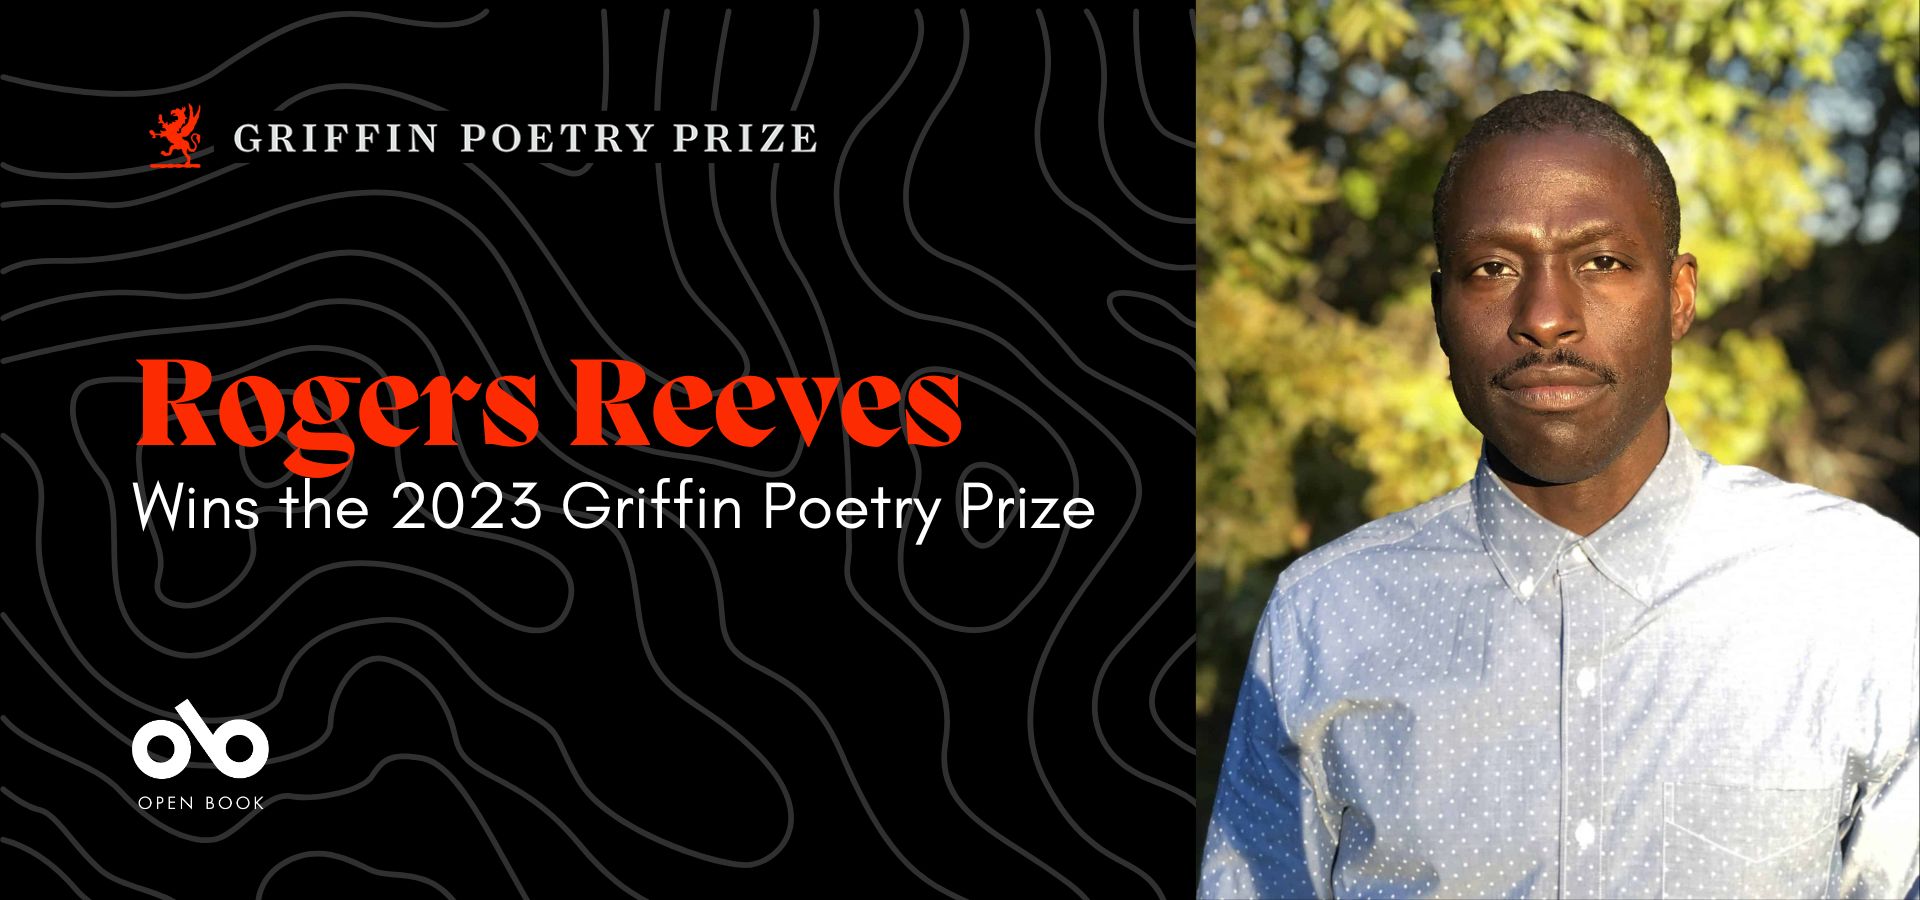 black banner image with Griffin Poetry Prize logo top left, Open Book logo bottom left, and photo of poet Roger Reeves on the right. Text on the left reads "Rogers Reeves wins the 2023 Griffin Poetry Prize"